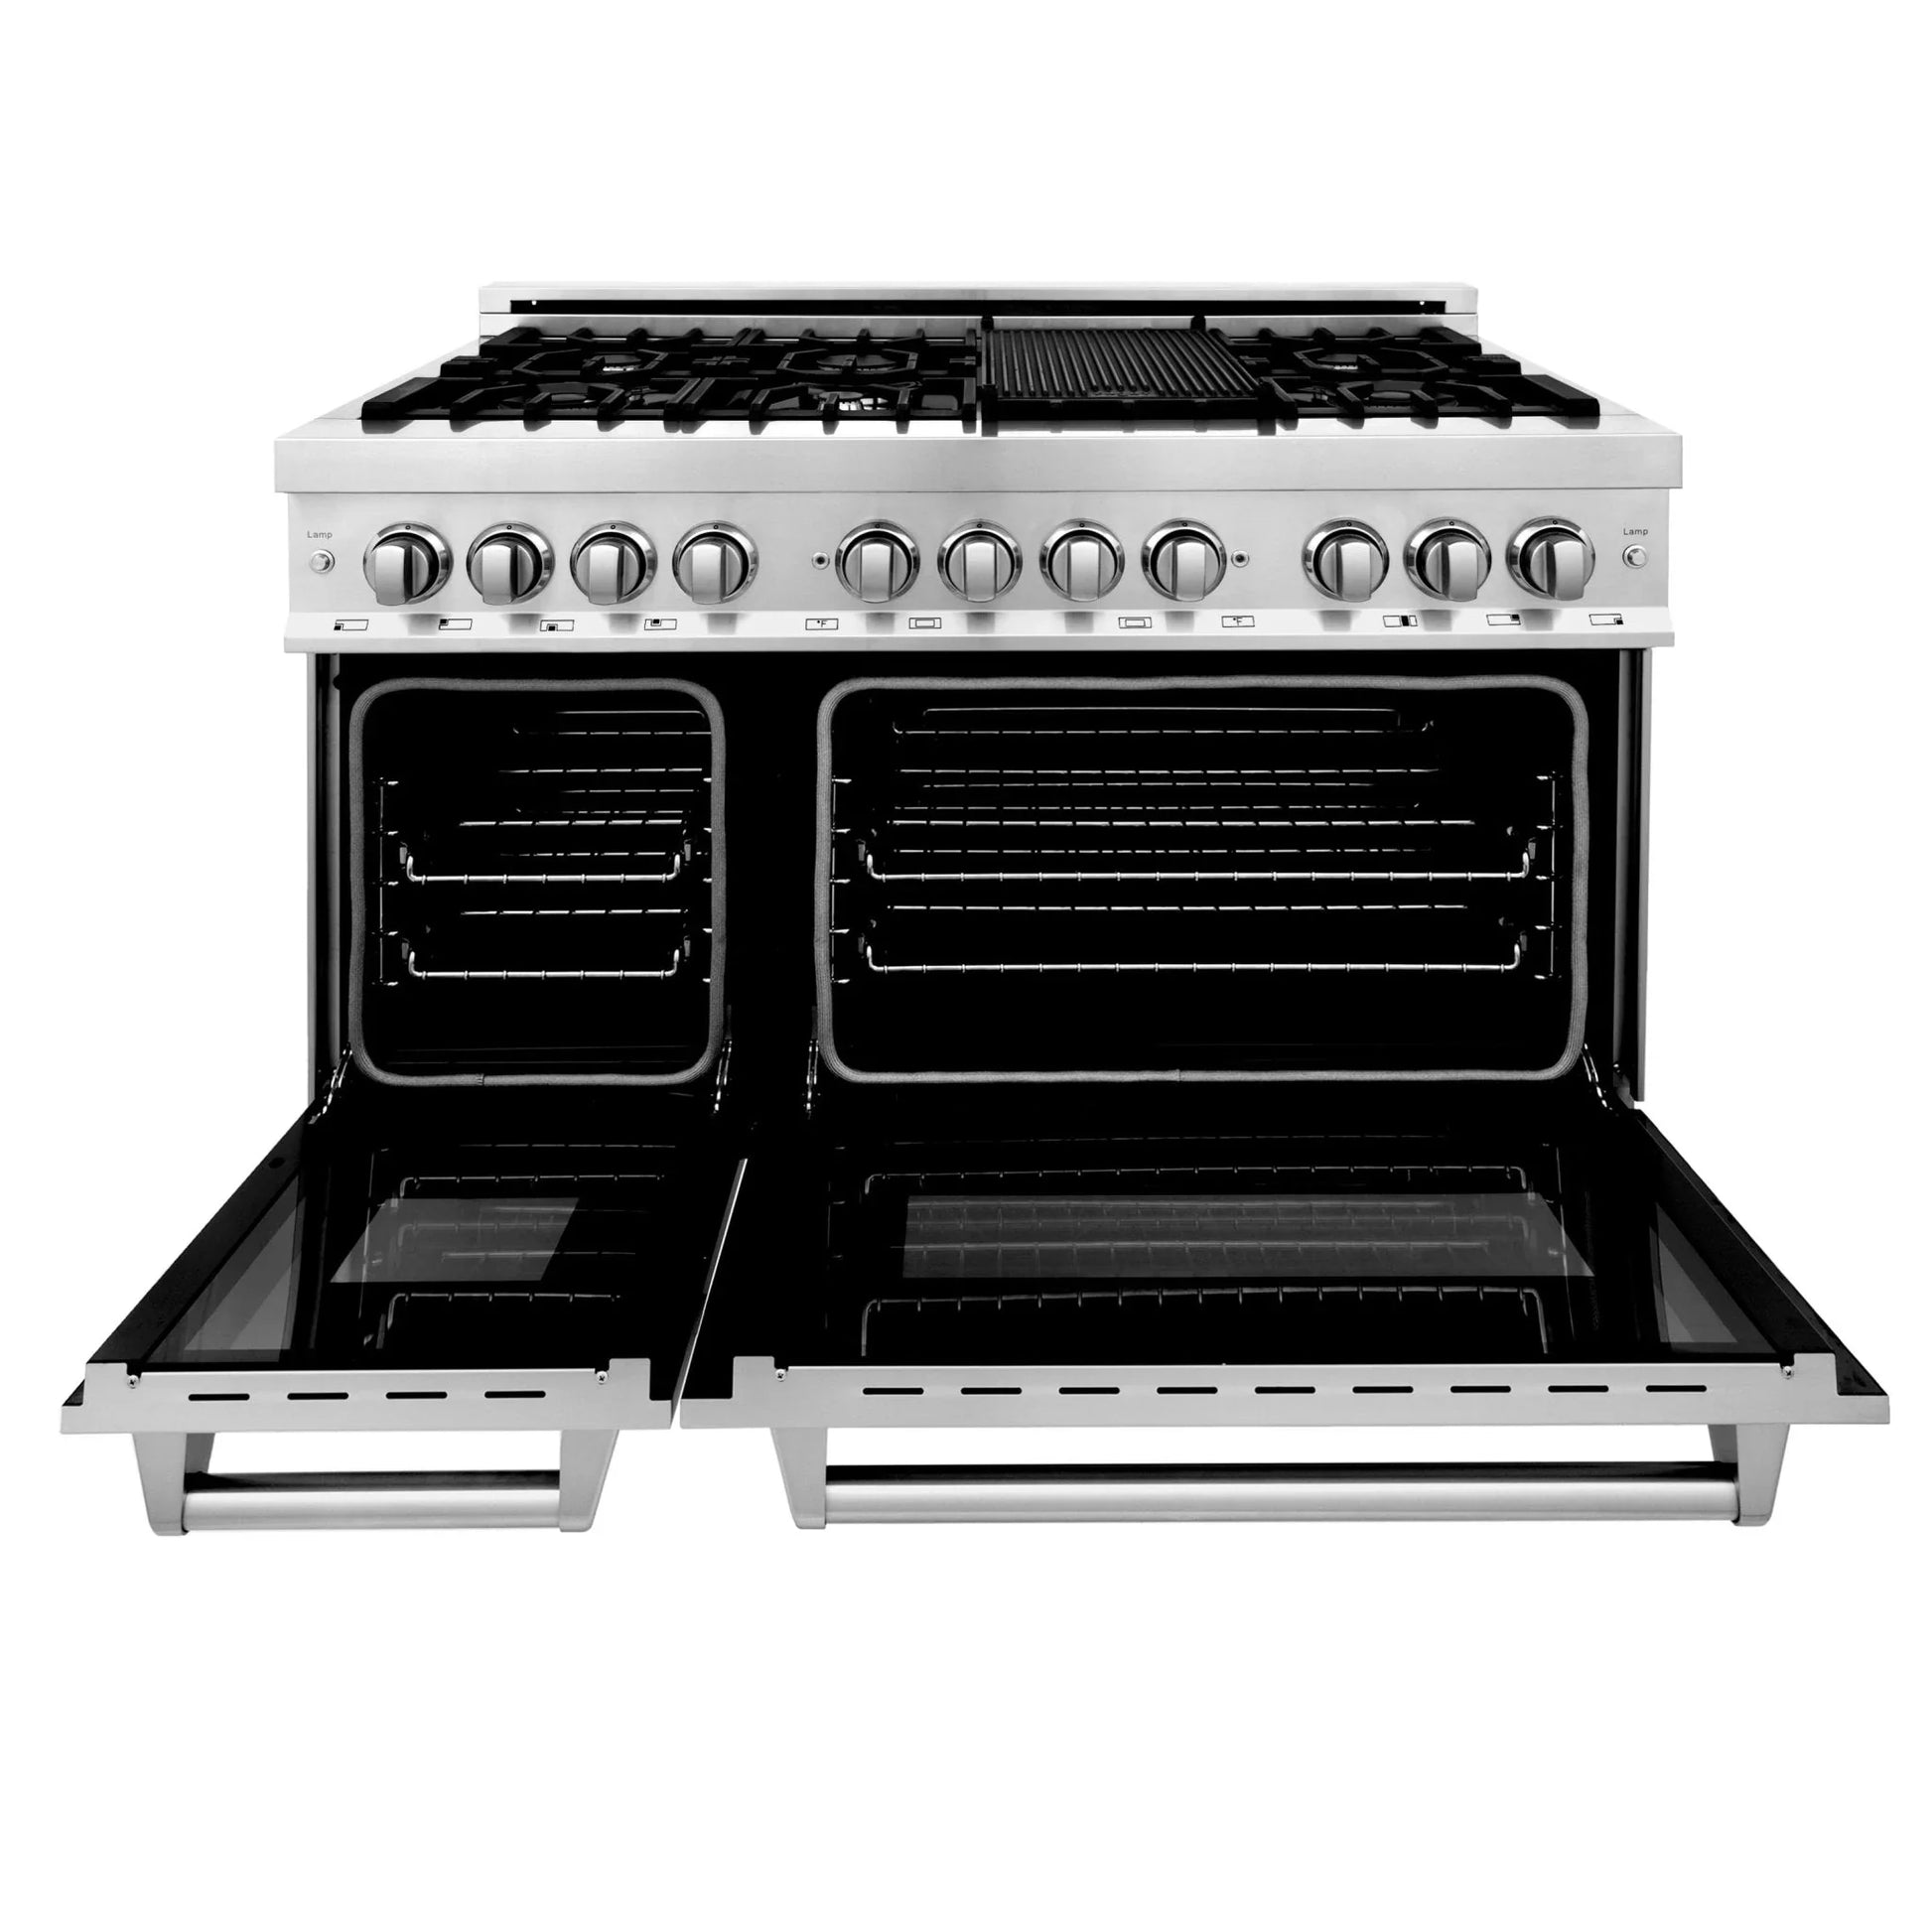 ZLINE 48" Dual Fuel Range - Stainless Steel, Gas Stove, and Electric Oven